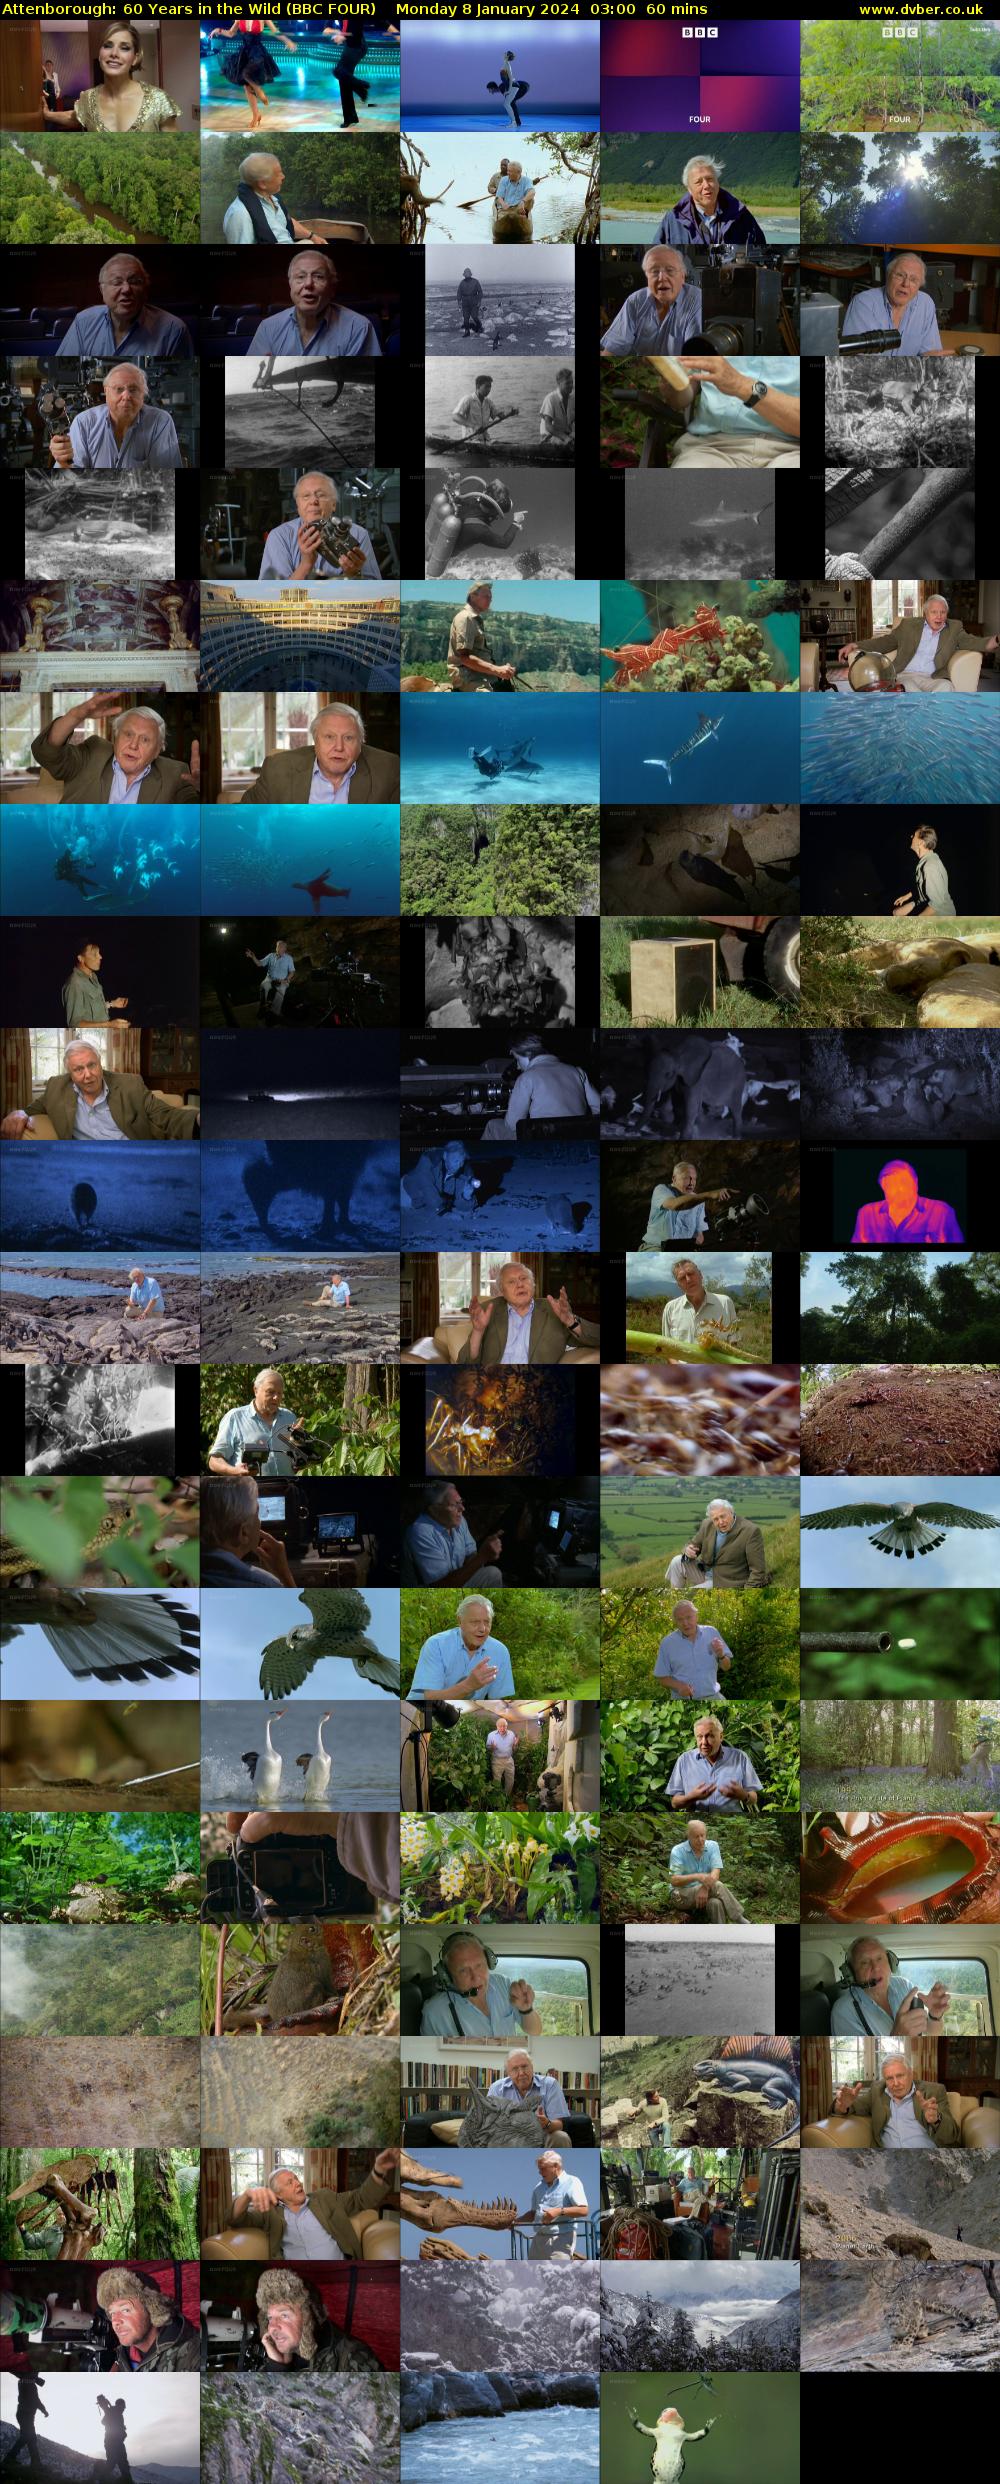 Attenborough: 60 Years in the Wild (BBC FOUR) Monday 8 January 2024 03:00 - 04:00